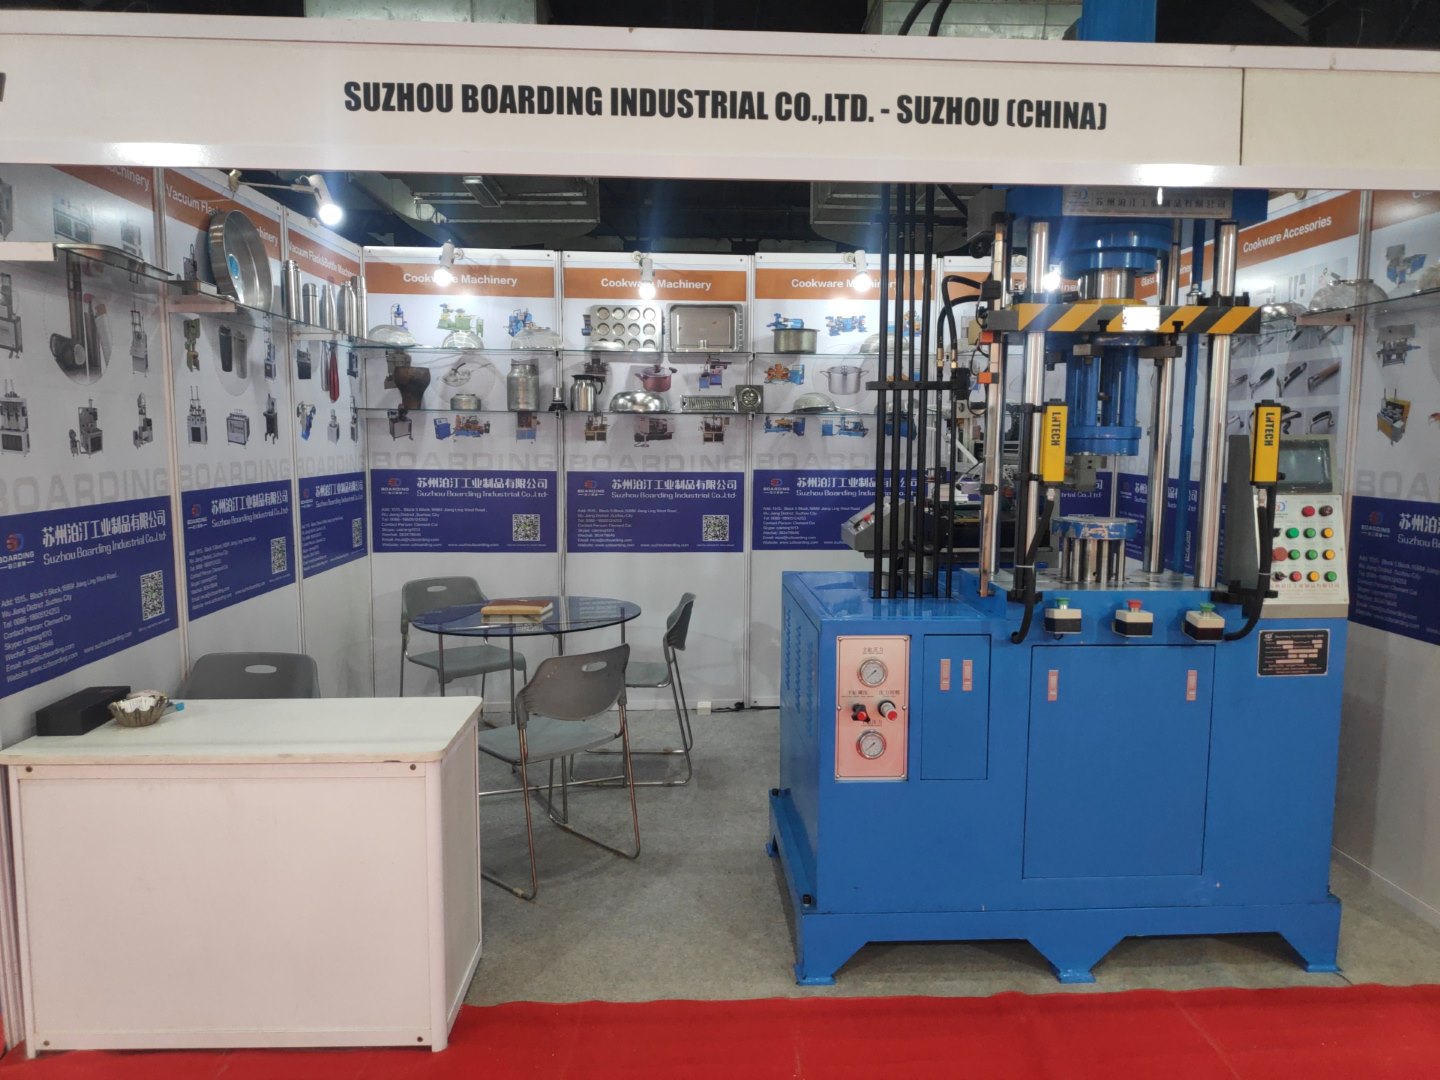 Mumbai SS Exhibition Held From 18th-20th,August